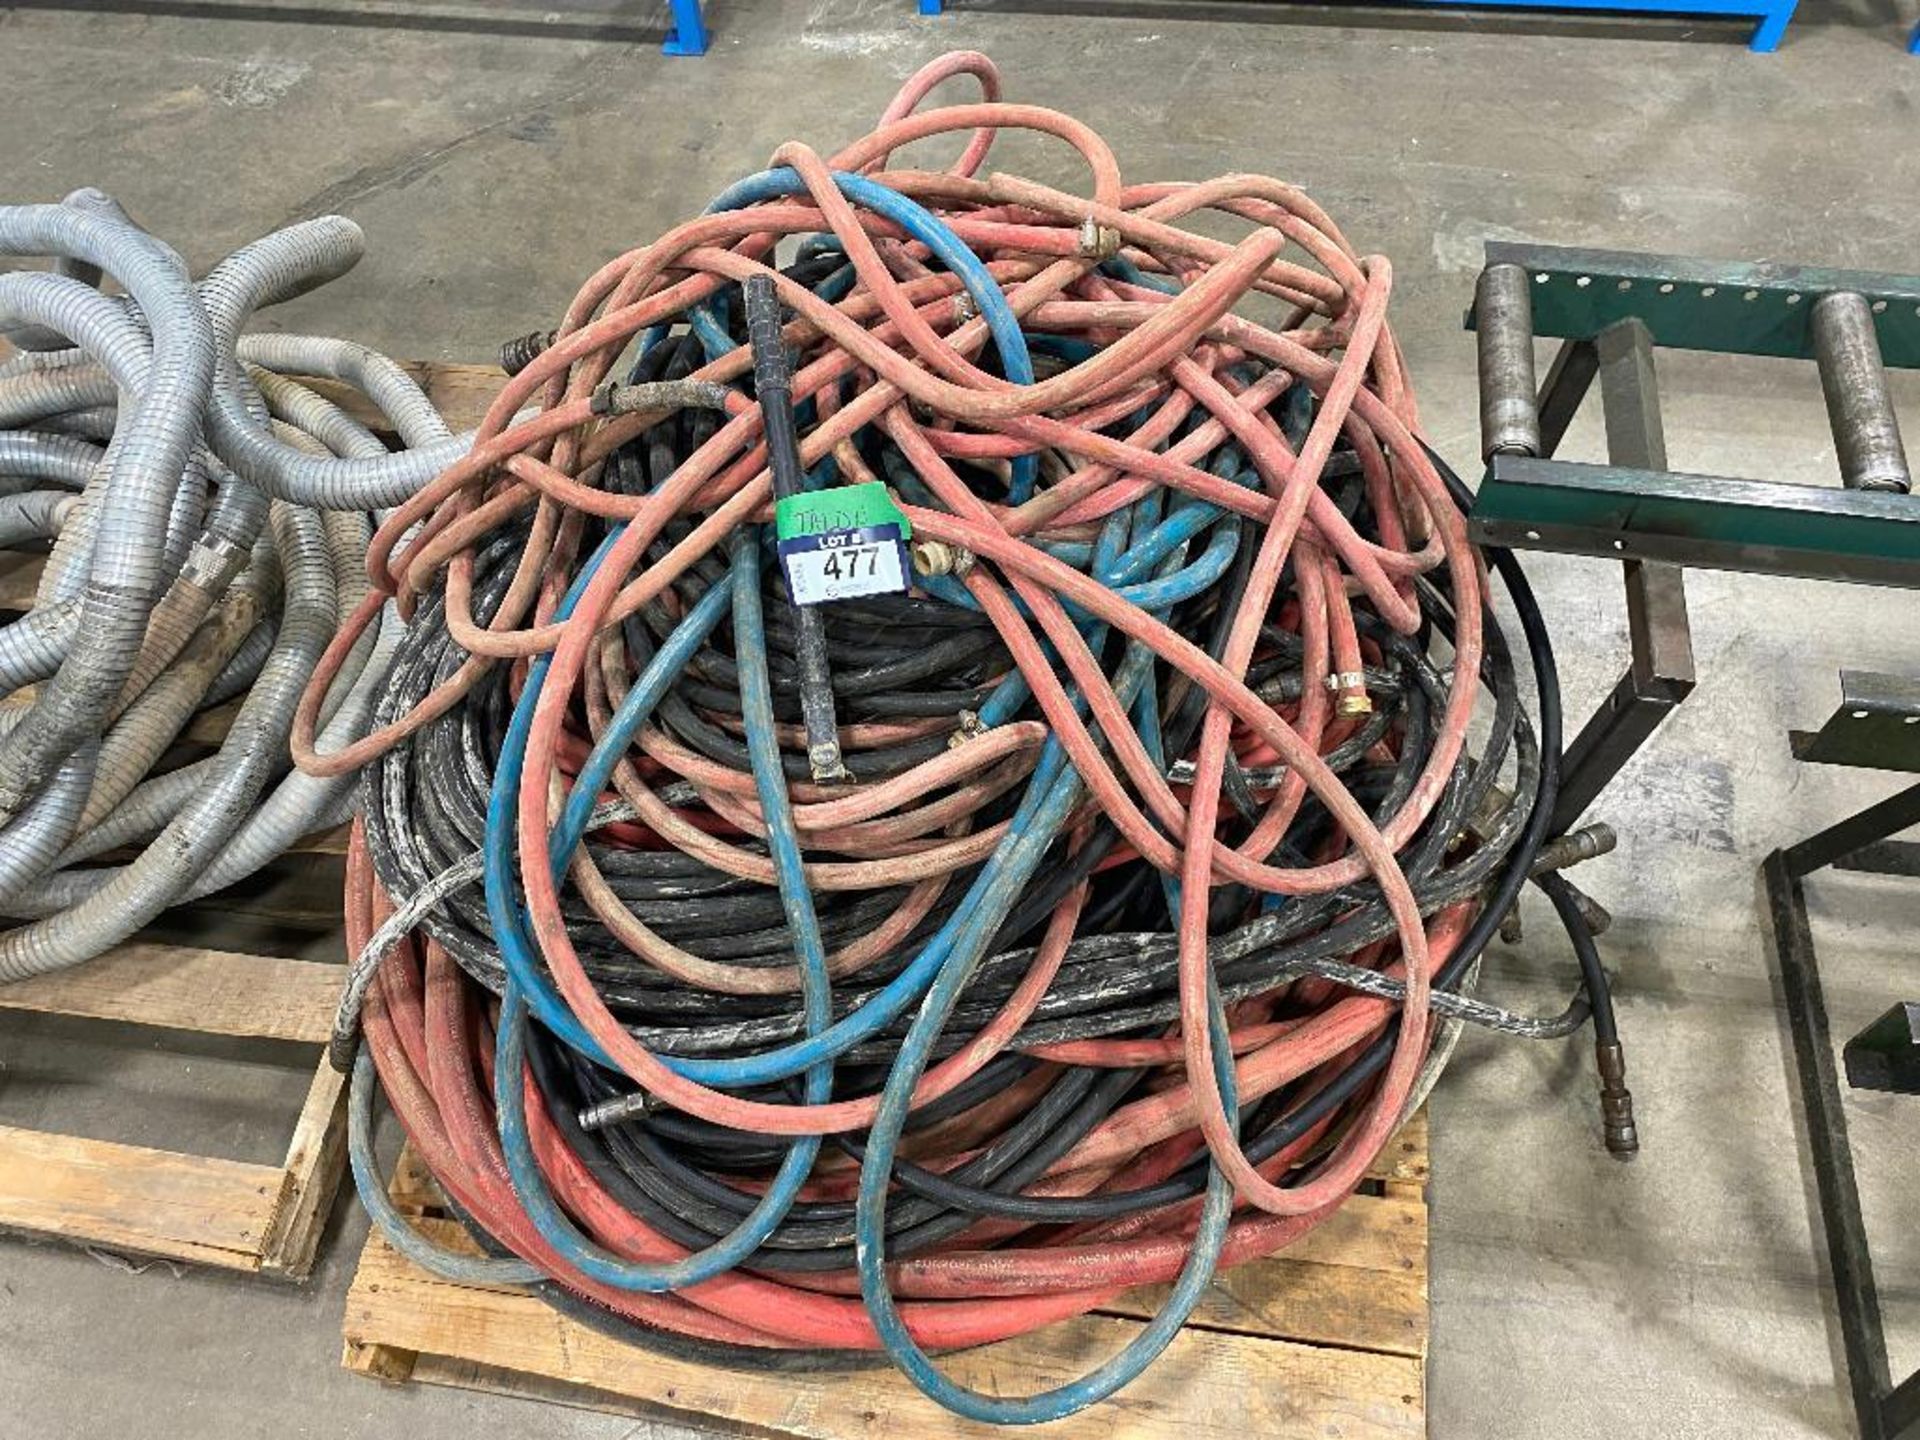 Pallet of Asst. Hydraulic Hose, Water Hose, etc. - Image 3 of 3